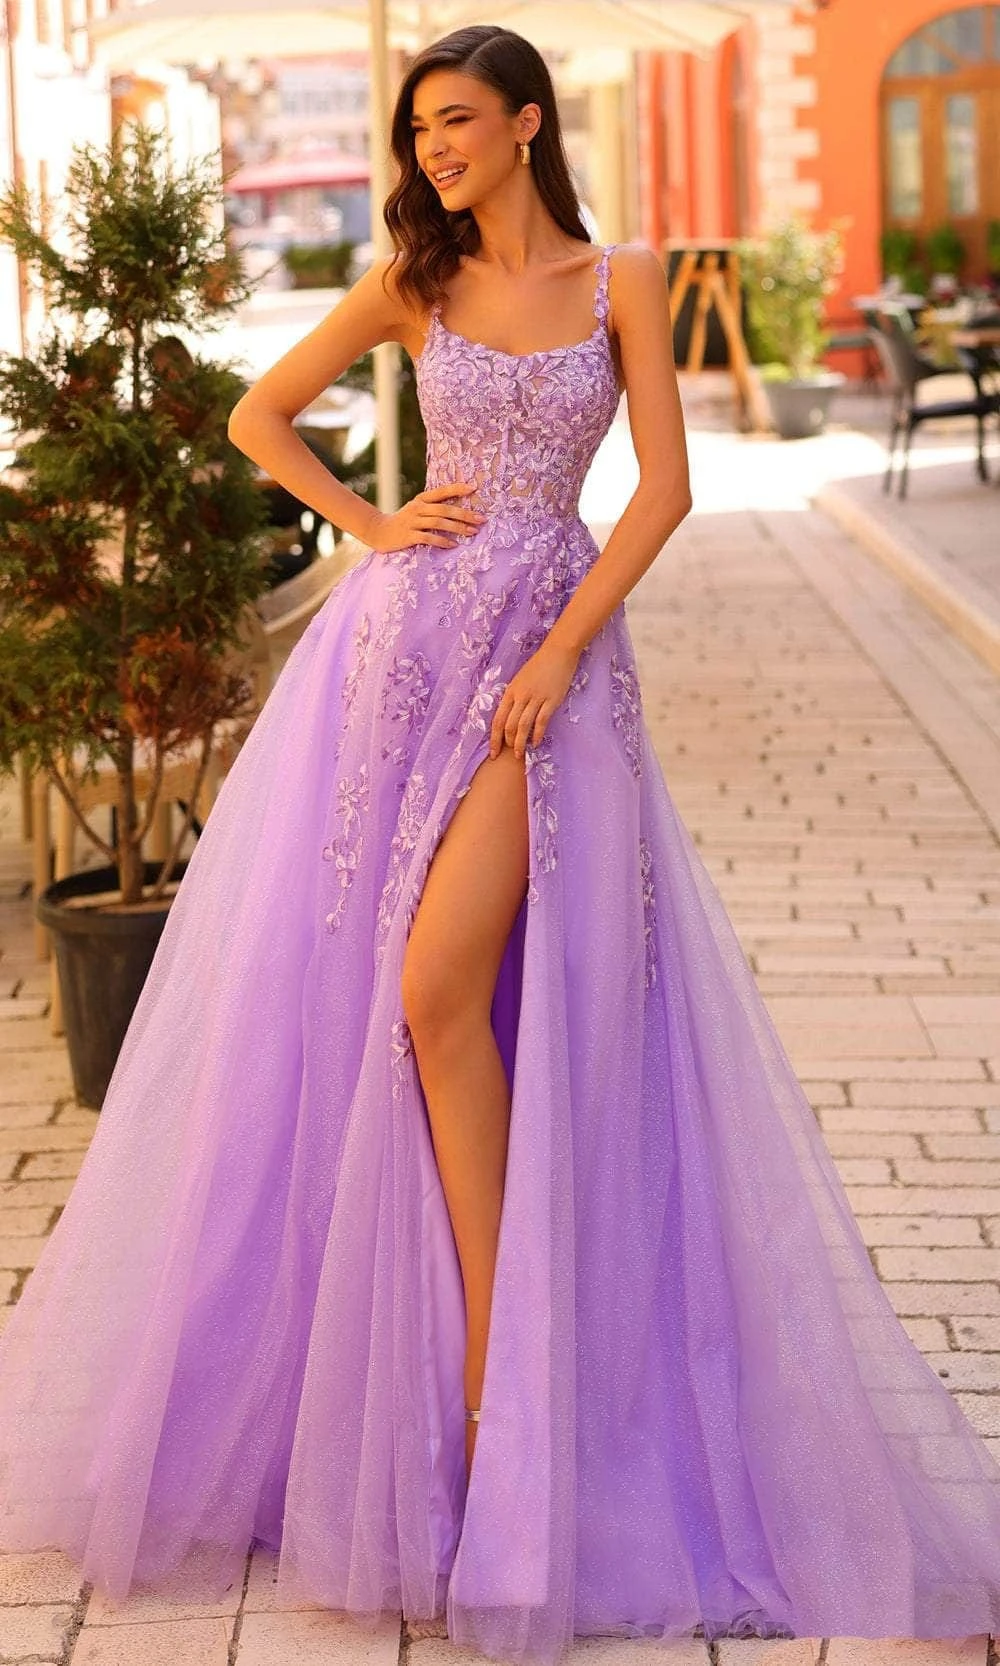 

Exquisite Spaghetti Strap Lace Appliques Tulle Corset Evening Dress High Slit Sleeveless Sparkly Illusion Formal Party Gowns